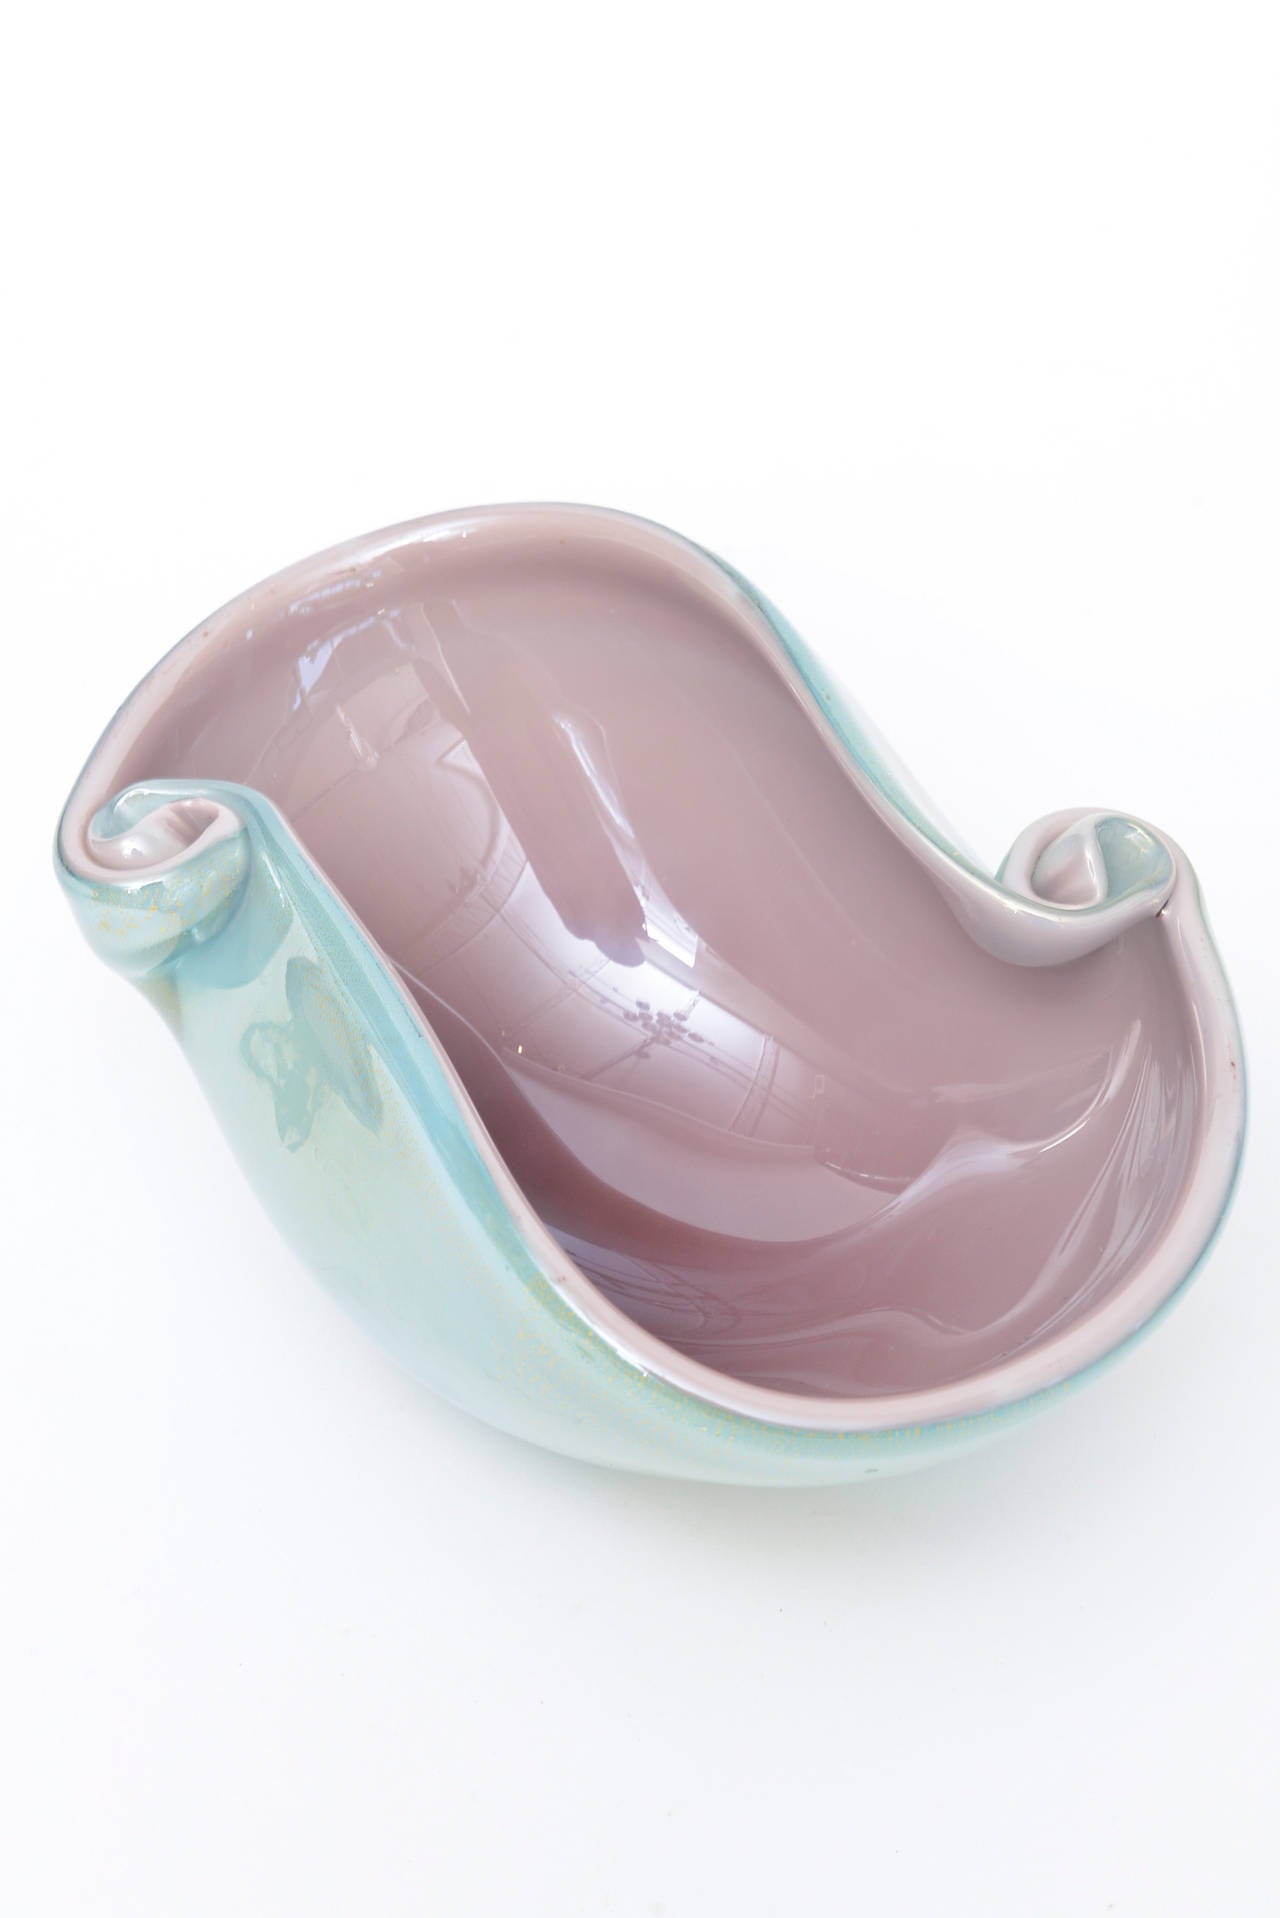 The beautiful interior of light aubergine dusty rose purple meets the exterior of turquoise with gold aventurine in this Italian vintage Murano glass bowl by Barovier e Toso. There is an abundance of gold aventurine on the sides and bottom over the